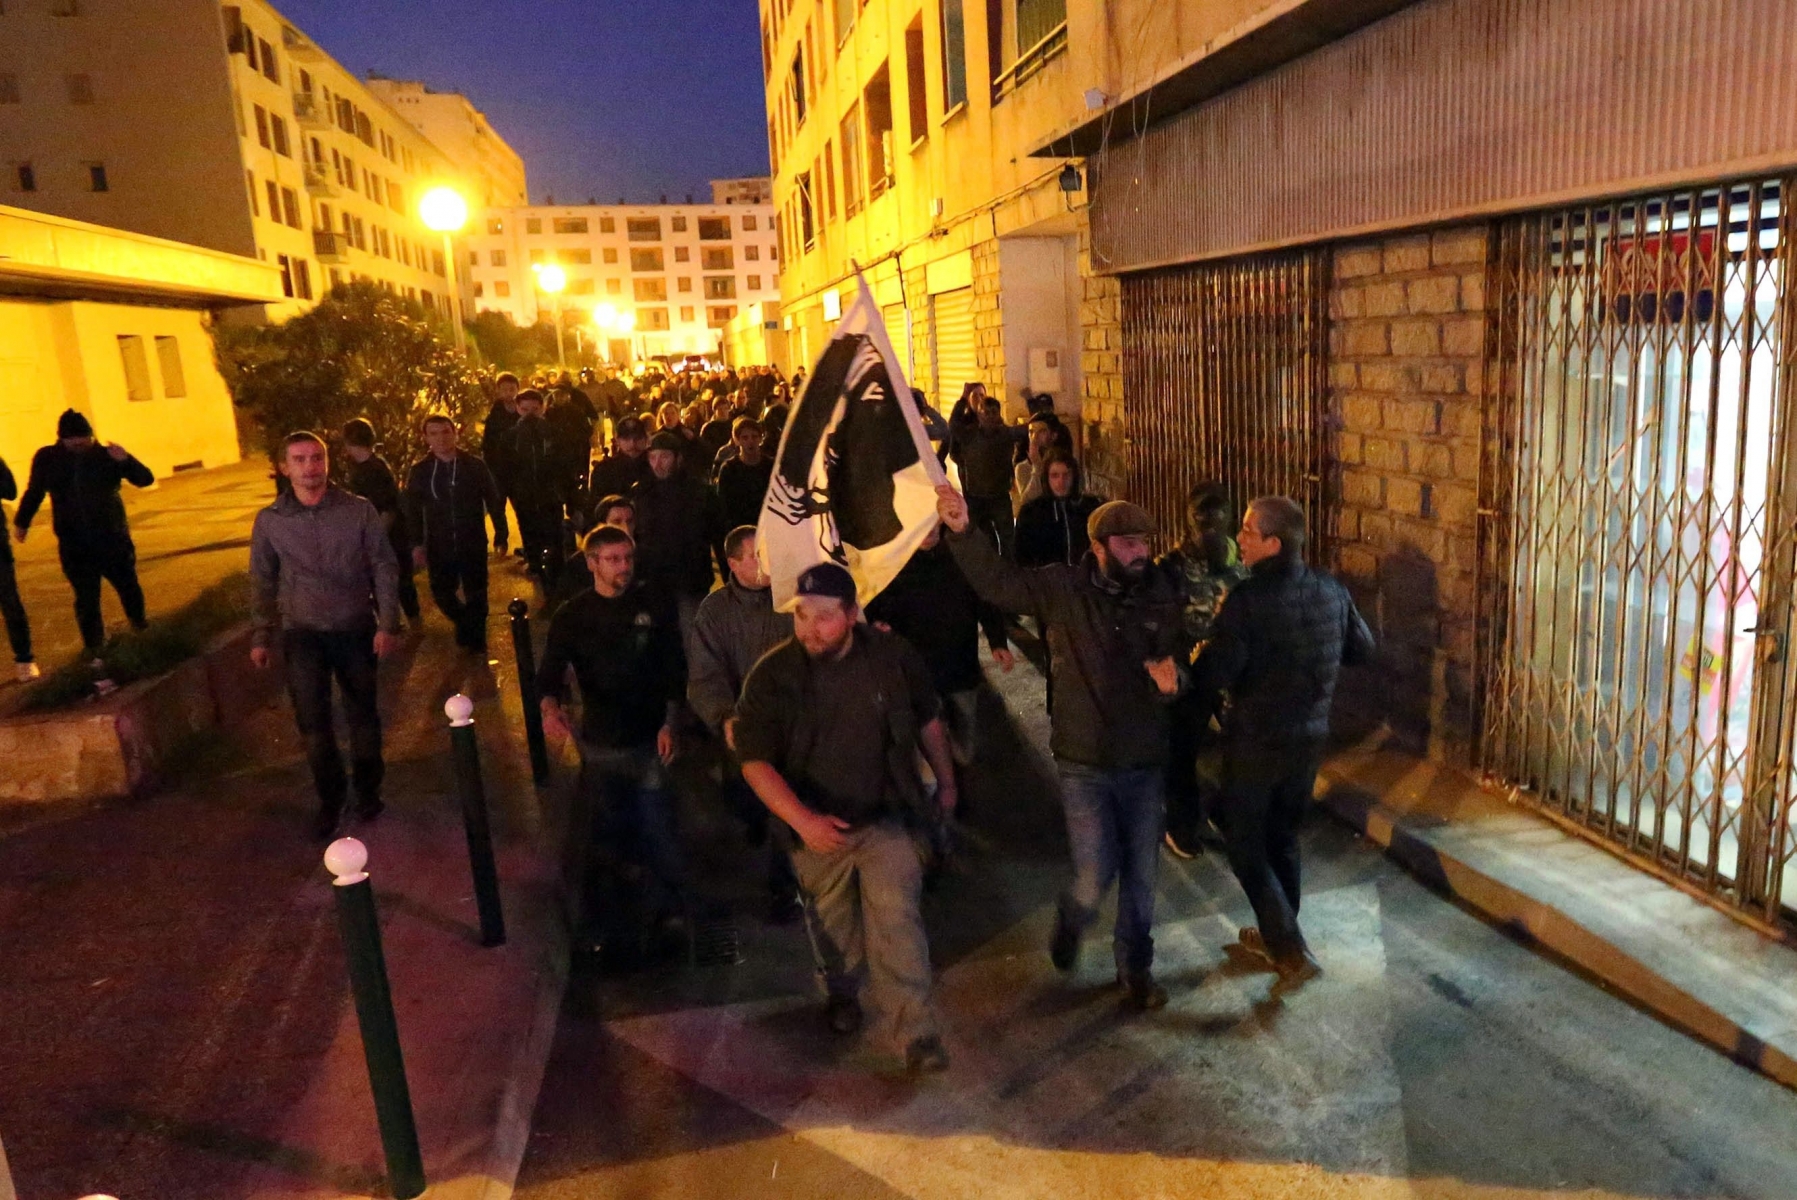 FILE - This Saturday, Dec. 26, 2015 file photo shows demonstrators, most of them angry against Muslim residents, marching behind the Corsican flag in Ajaccio, on the French Mediterranean island of Corsica. Frances interior minister is seeking to halt violence in Corsica after protesters vandalized a Muslim prayer room in anger over an ambush of firefighters. Bernard Cazeneuve, visiting the Corsican city of Ajaccio on Wednesday, told reporters there is no place in Corsica for violence or racism. (AP Photo/Jean-Pierre Belzit, File) France Corsica